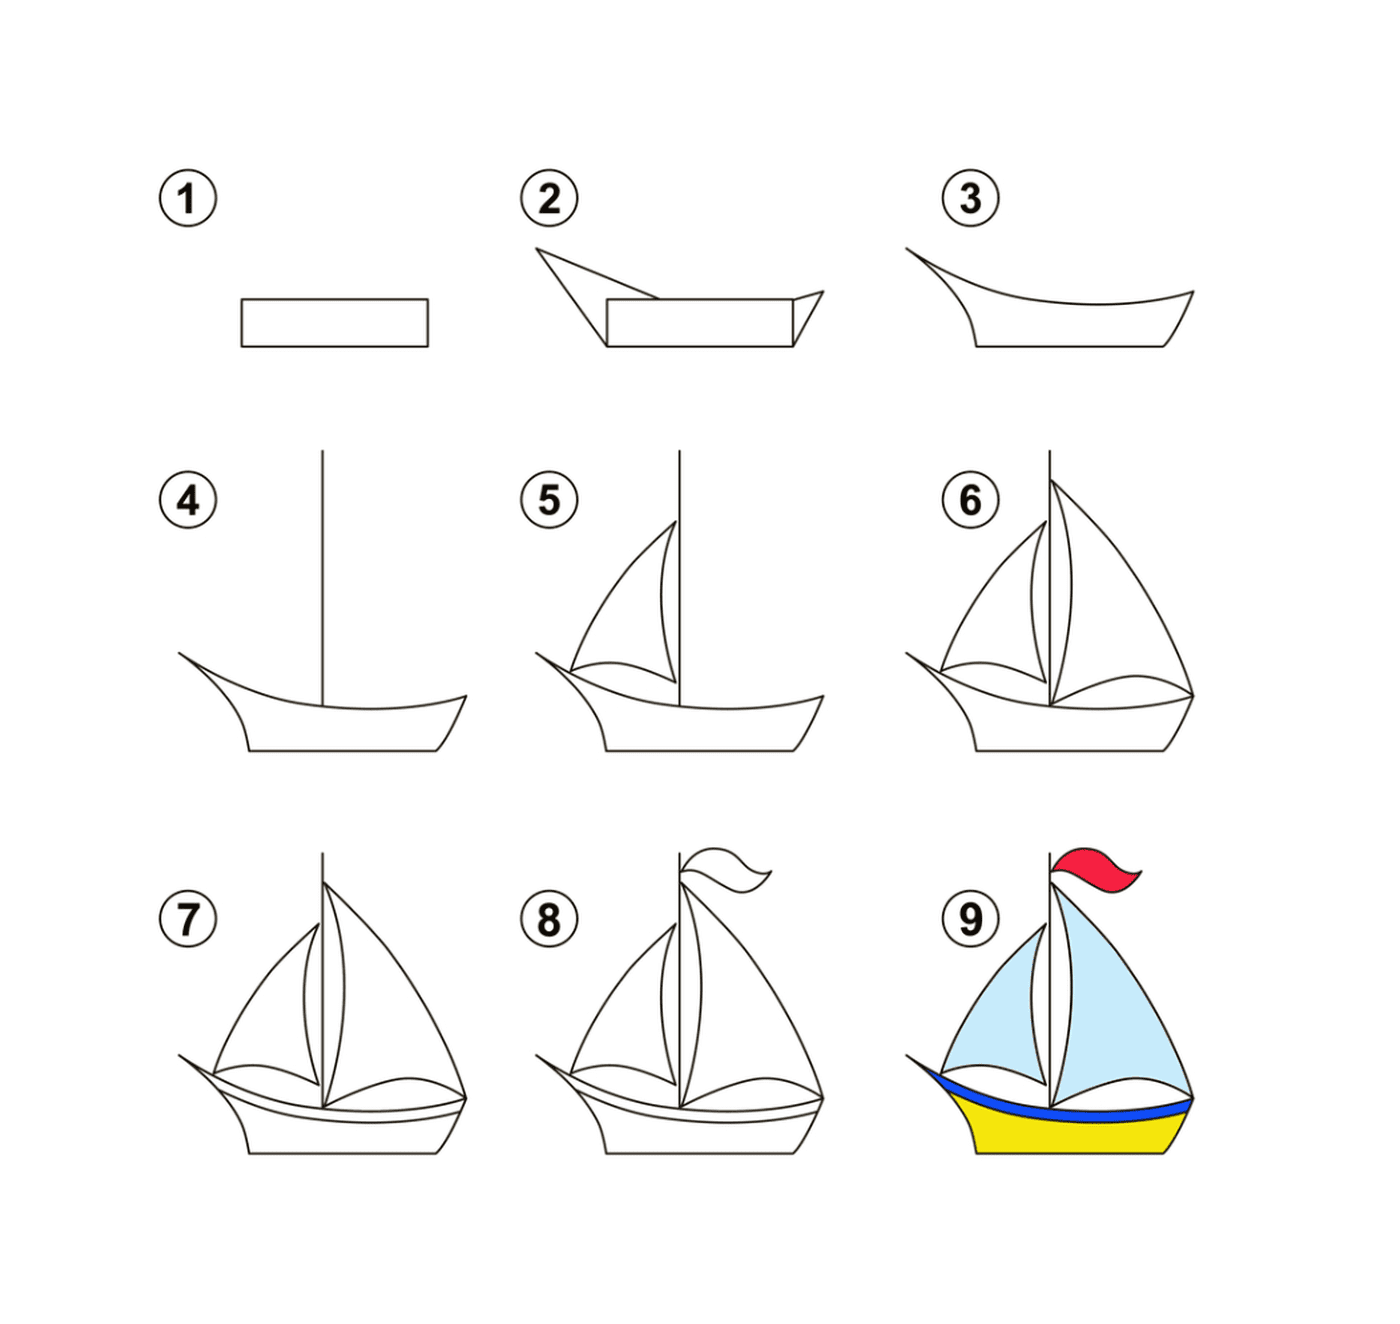  Step by step instructions on how to draw a sailboat 